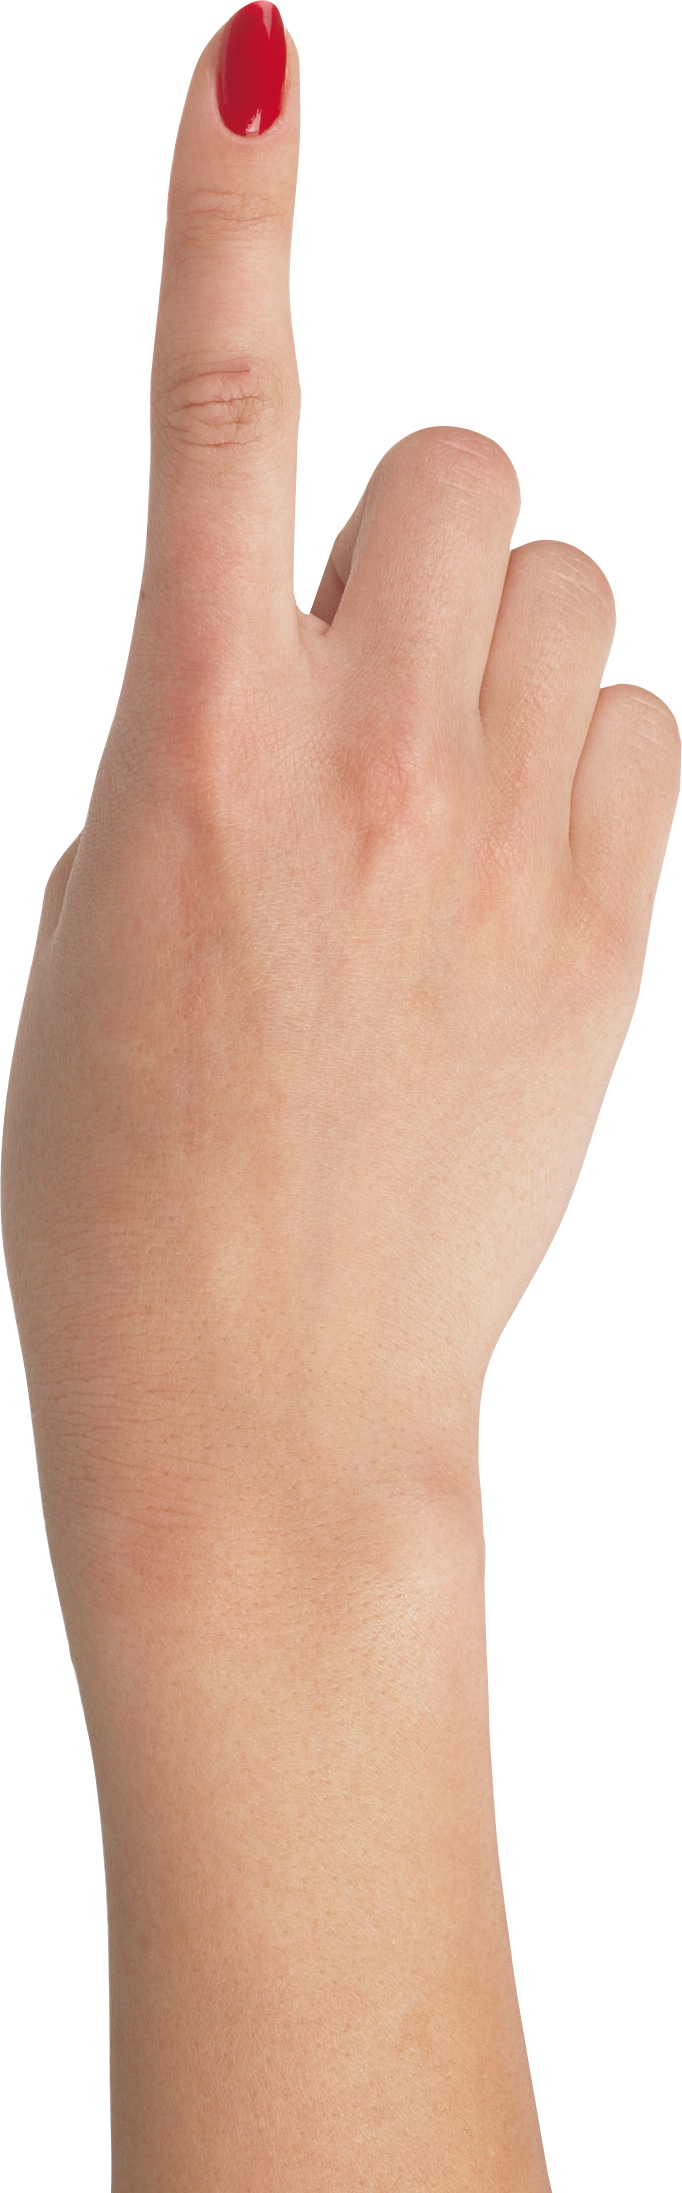 One Finger Hand PNG Image